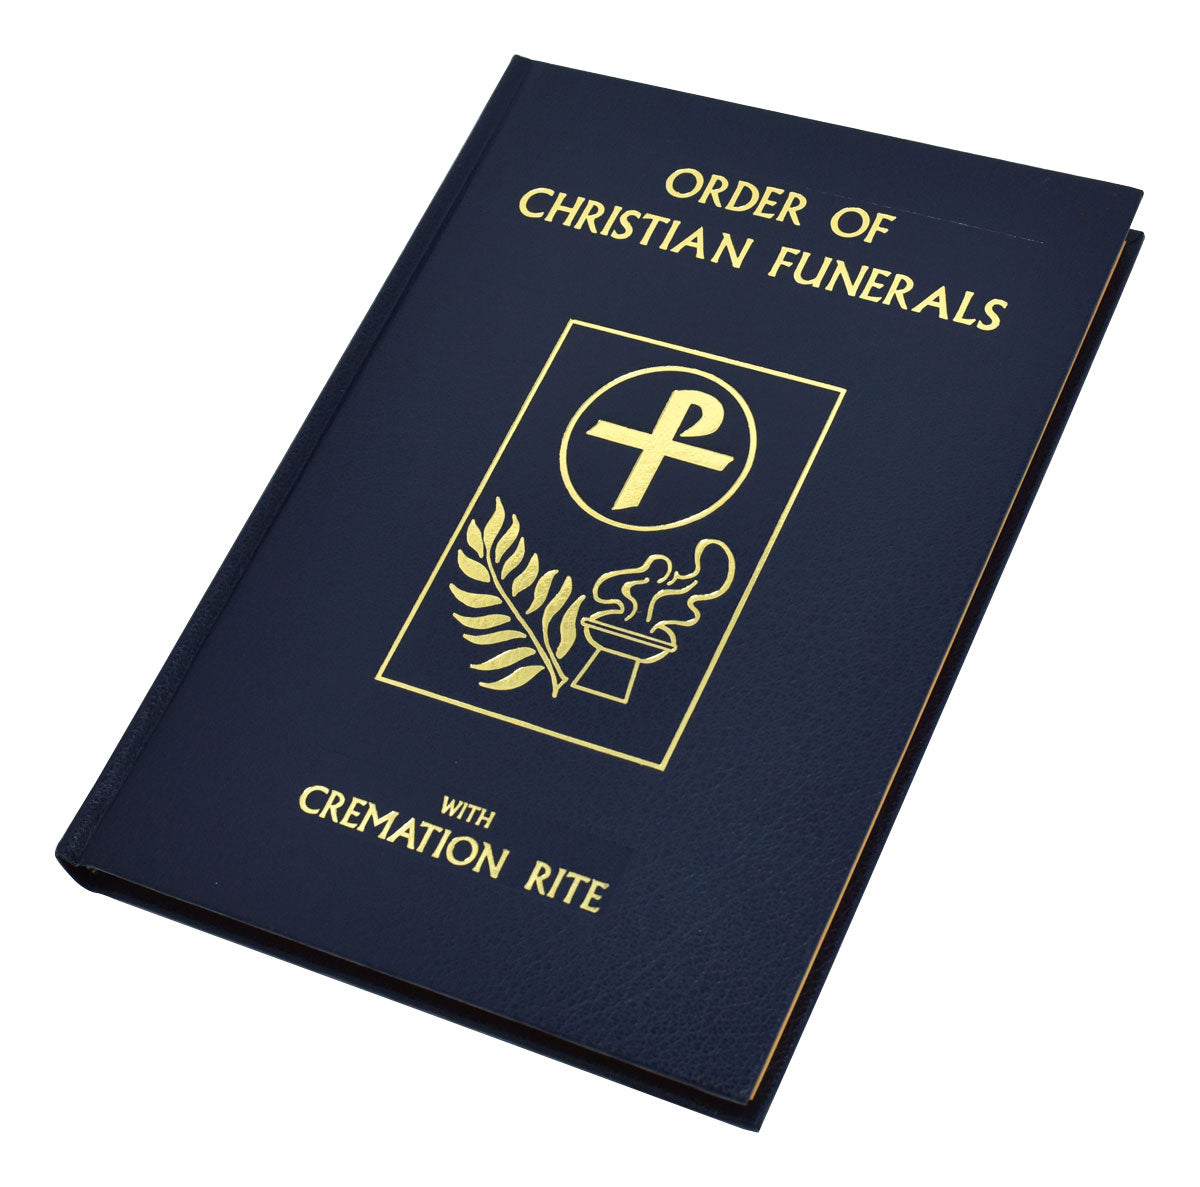 Order of Christian Funerals 350/22